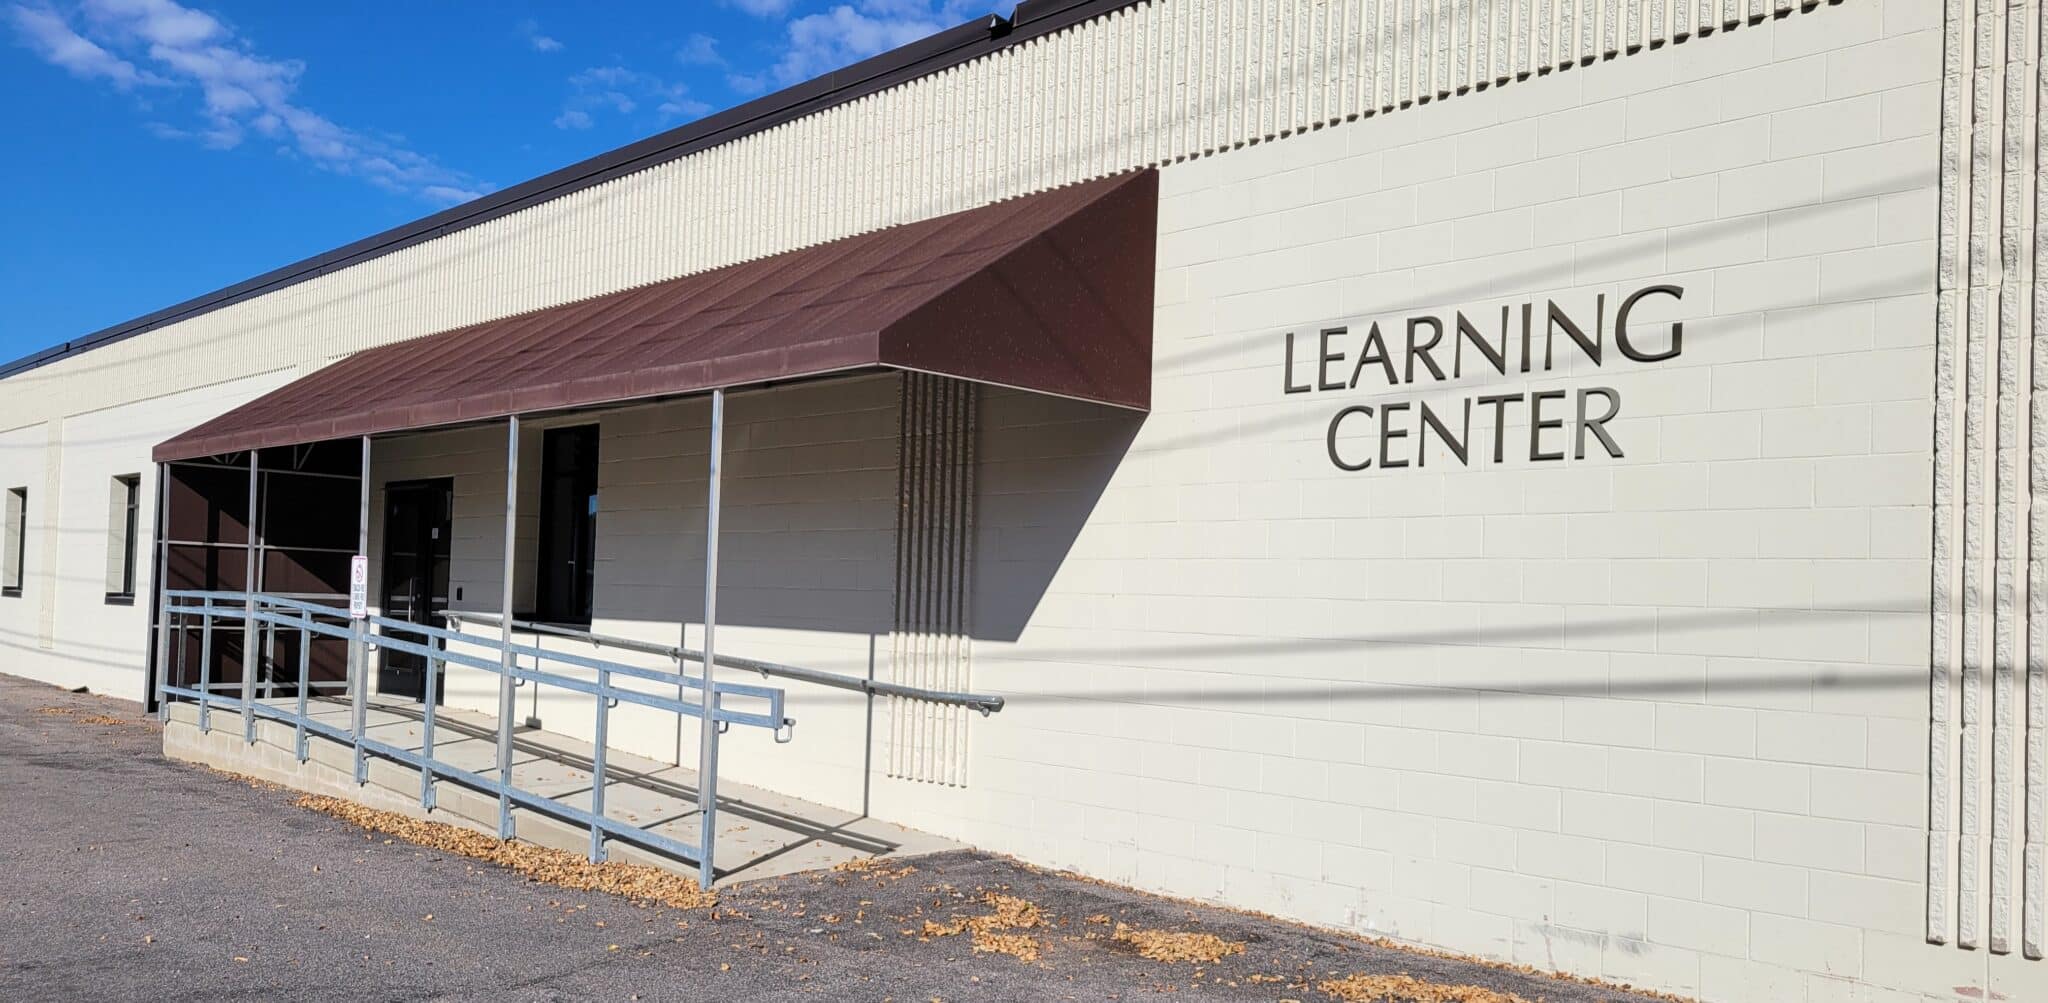 Learning Center (2)A